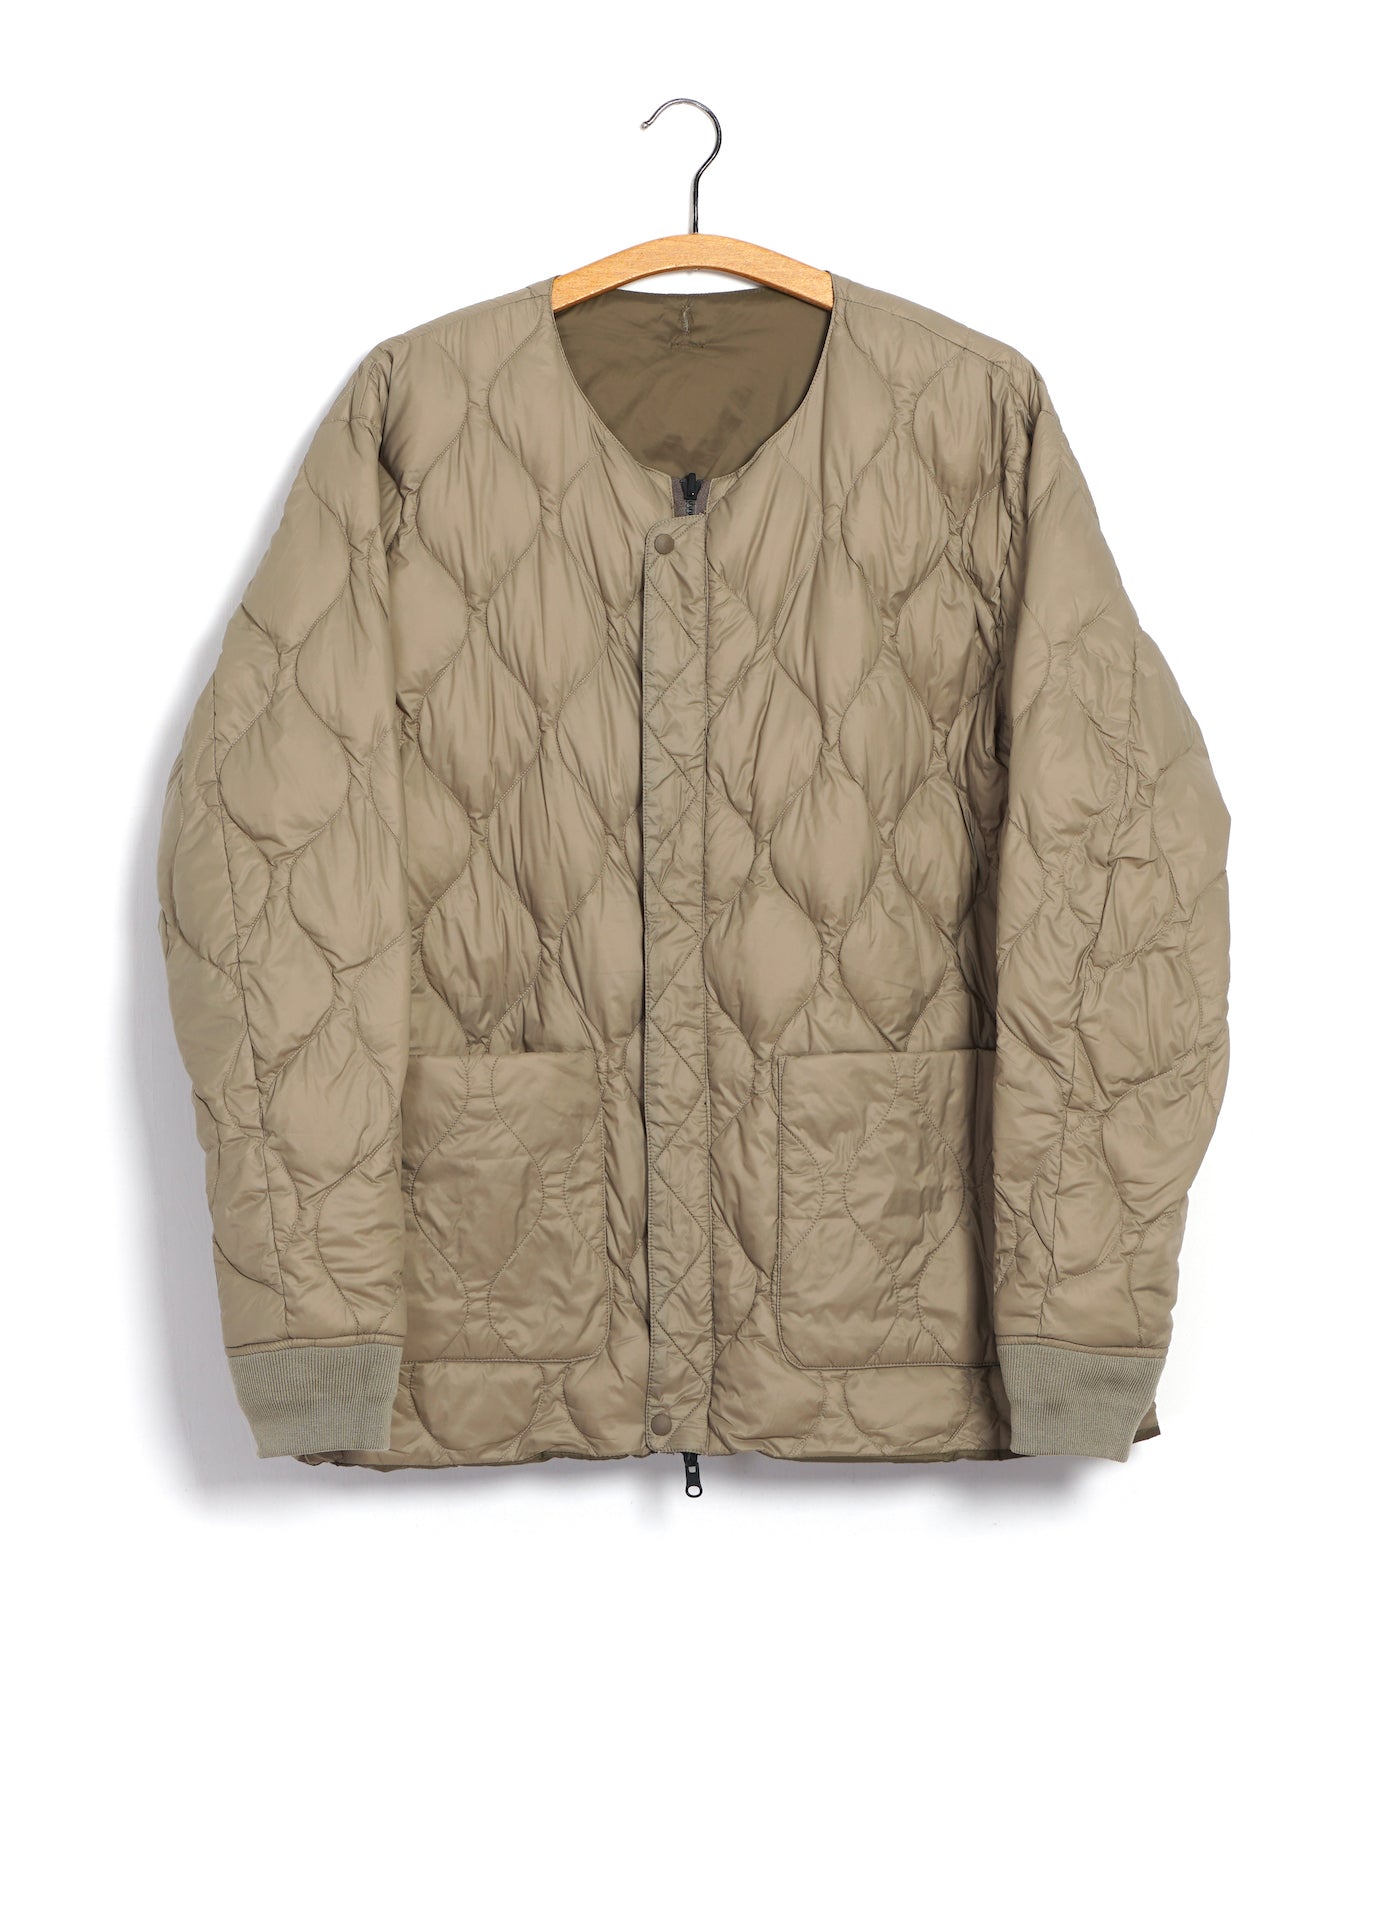 TAION x BEAMS | Reversible MA-1 Type Inner Down Jacket | Olive/Beige